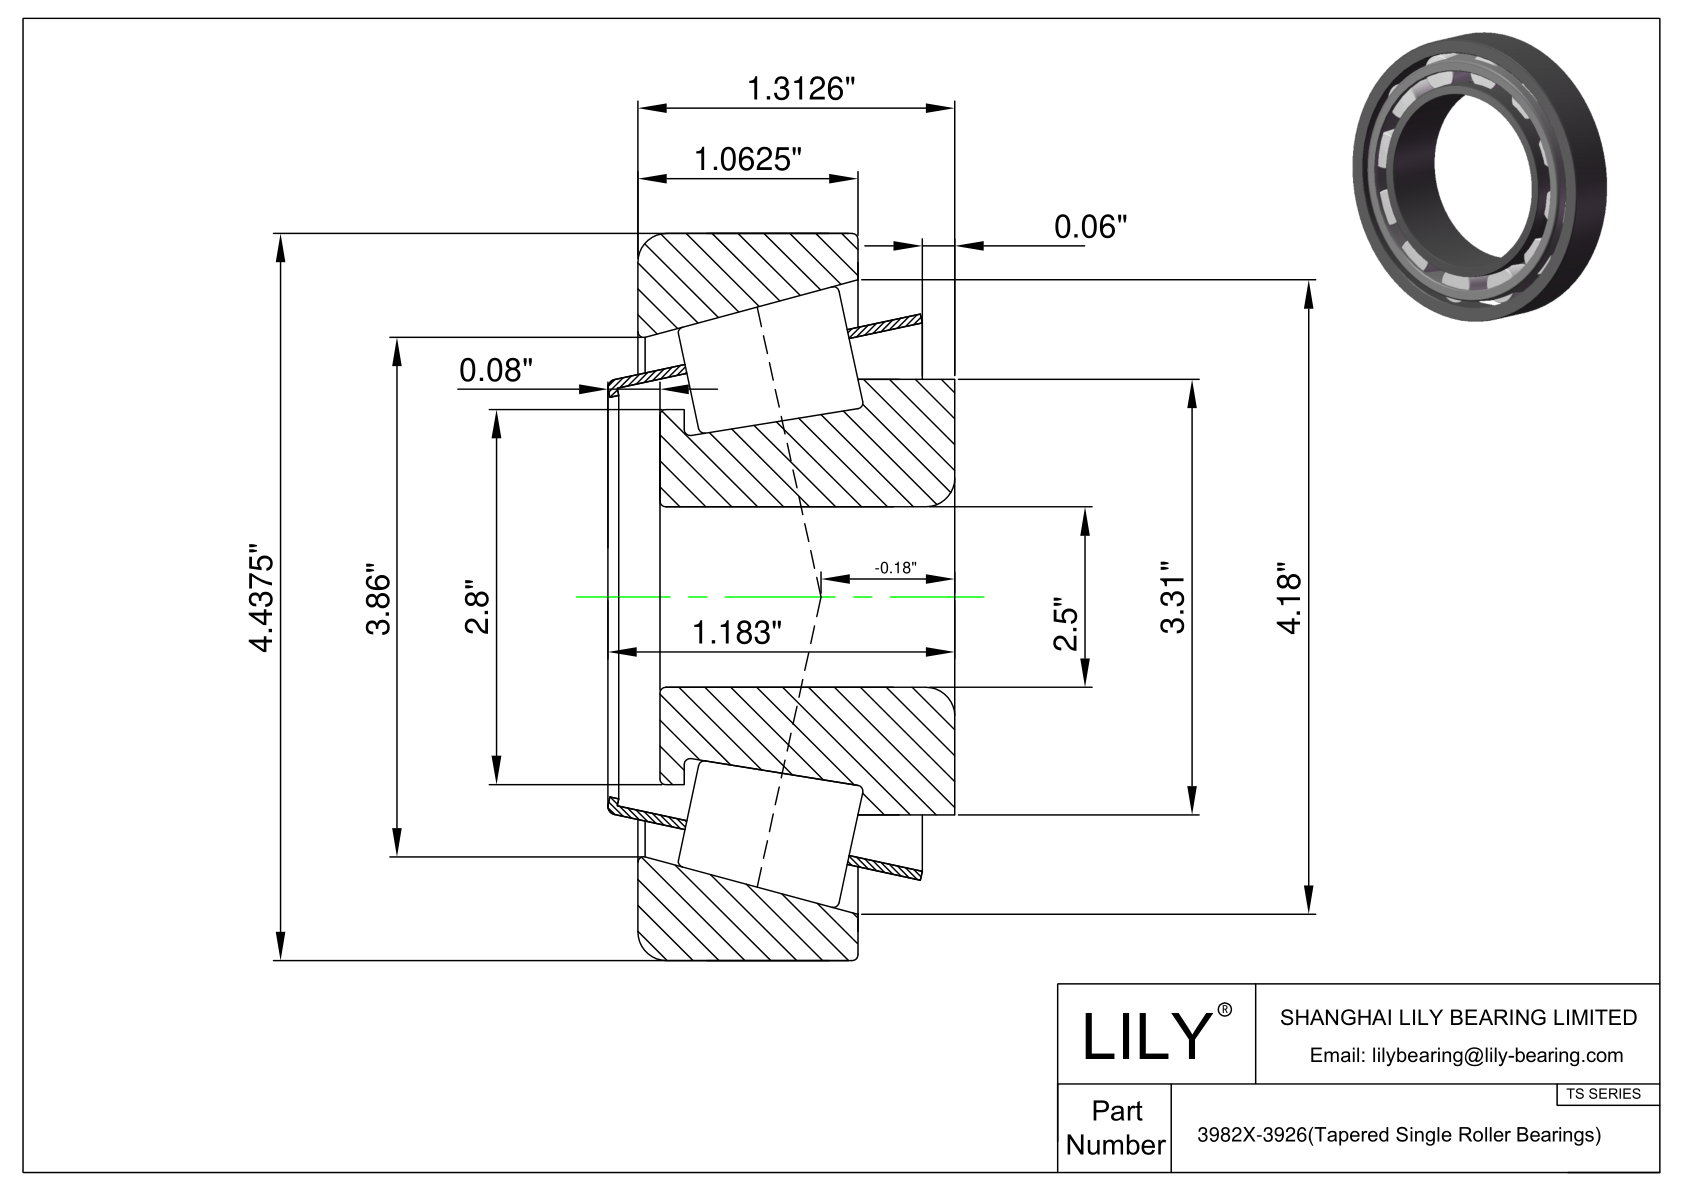 3982X-3926 TS (Tapered Single Roller Bearings) (Imperial) cad drawing